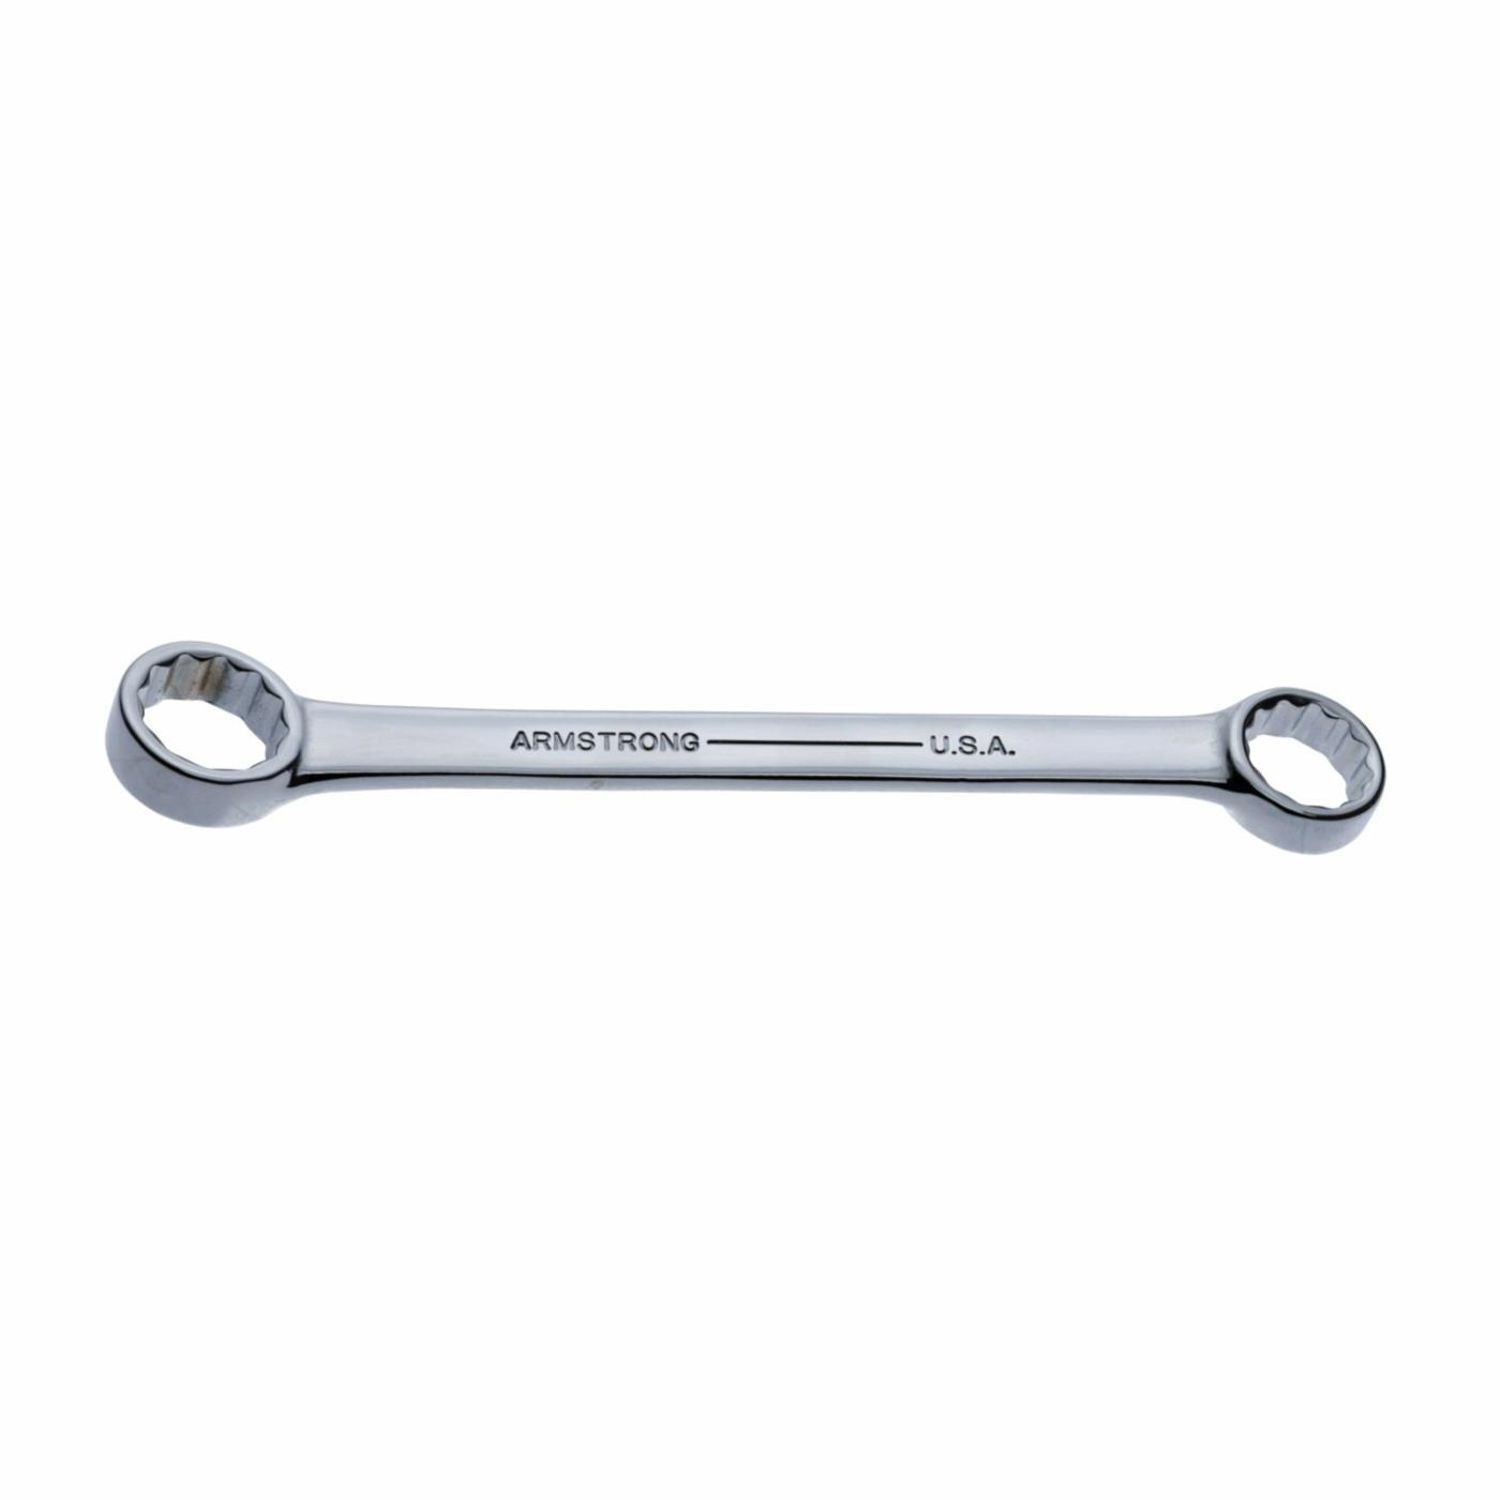 Armstrong 26-579 12 Point Full Polish 15° Offset Short Box Wrench 9/16 x 5/8 USA